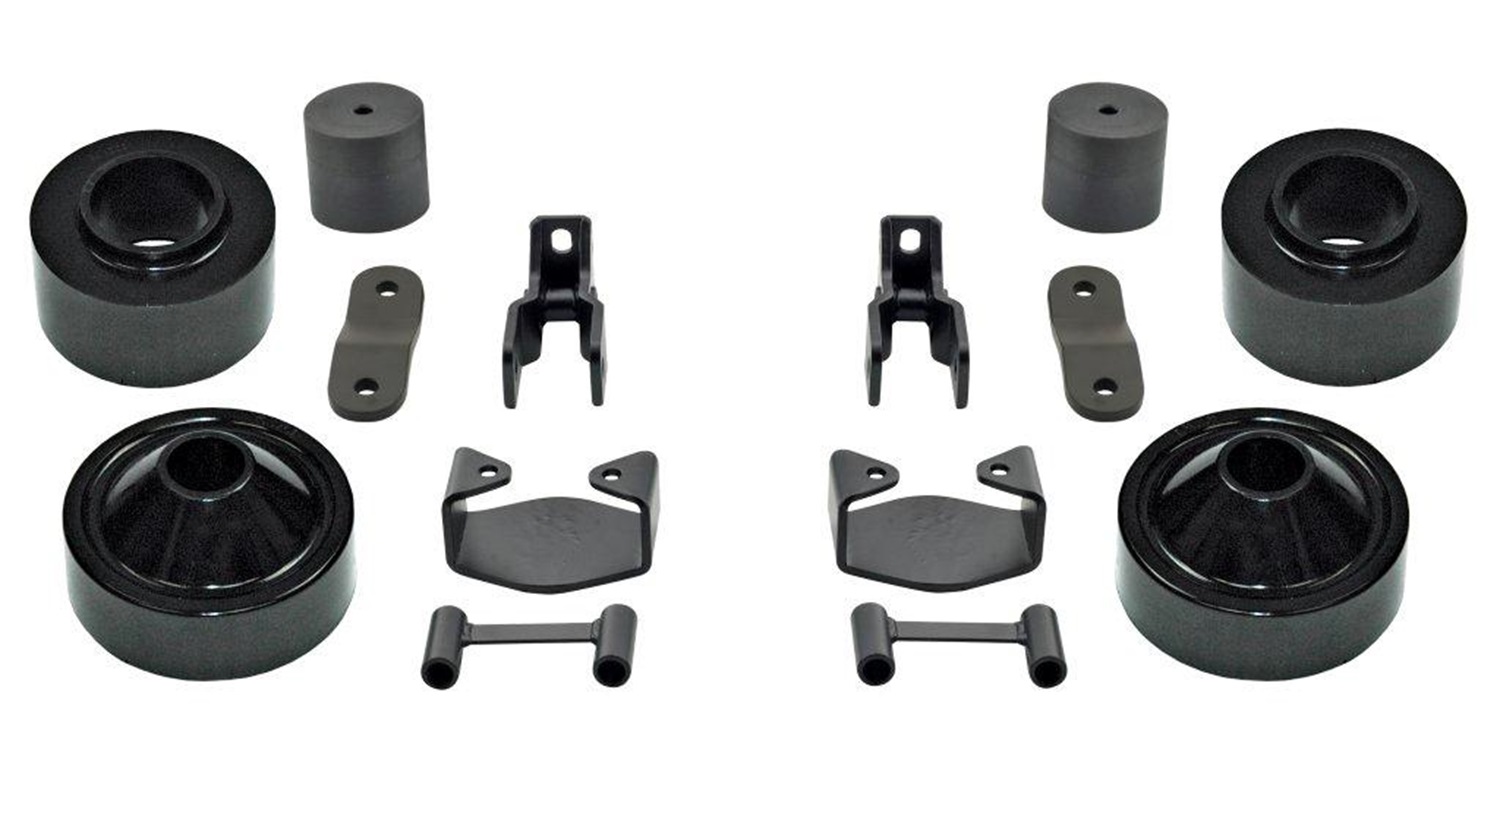 Rubicon Express Rubicon Express RE7132 Spacer Lift System Fits 07-15 Wrangler (JK)